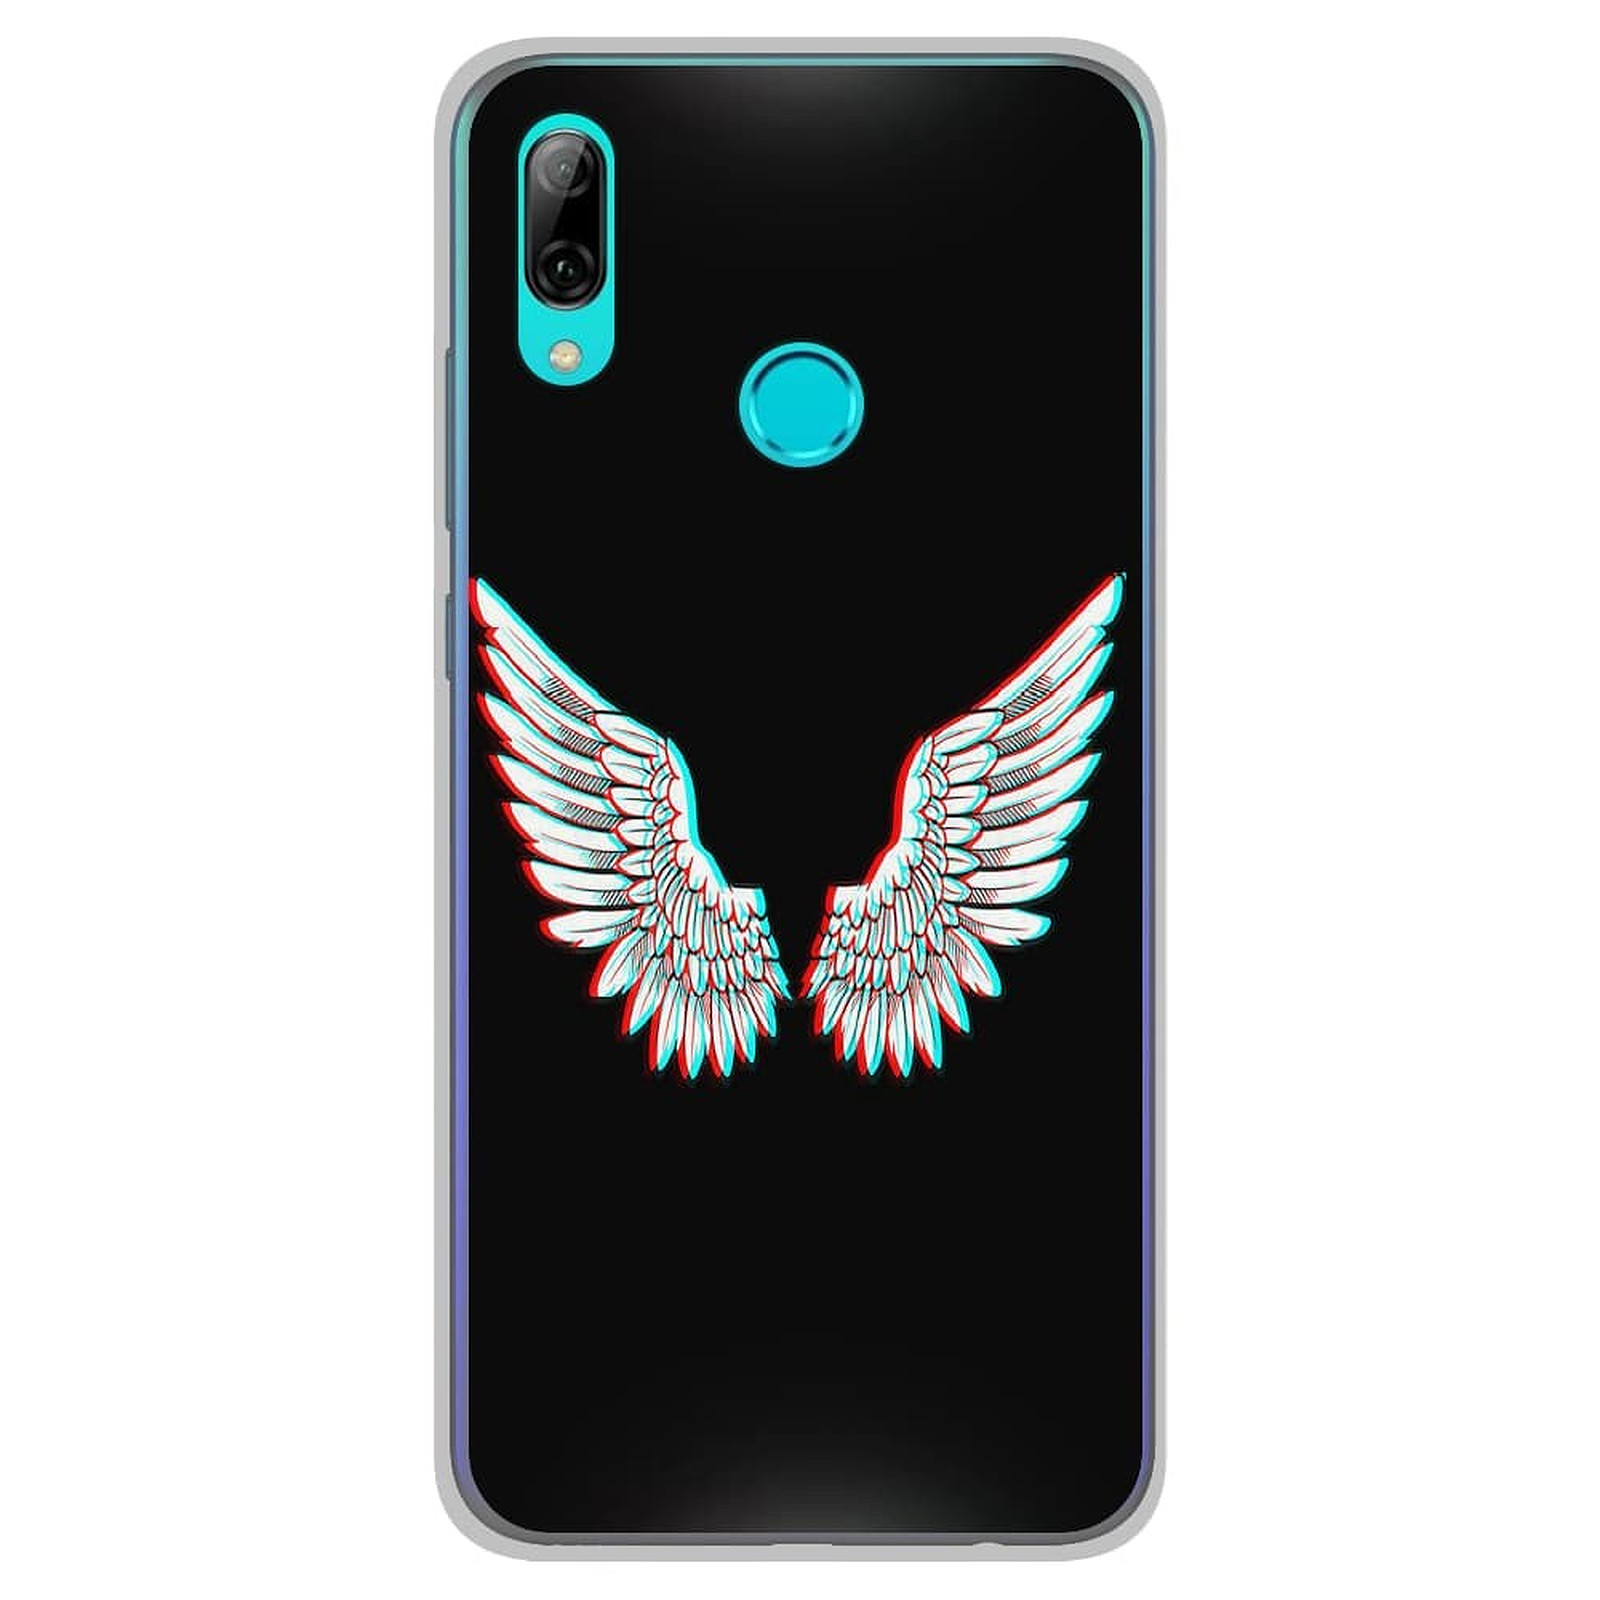 1001 Coques Coque silicone gel Huawei P Smart 2019 motif Ailes d'Ange - Coque telephone 1001Coques